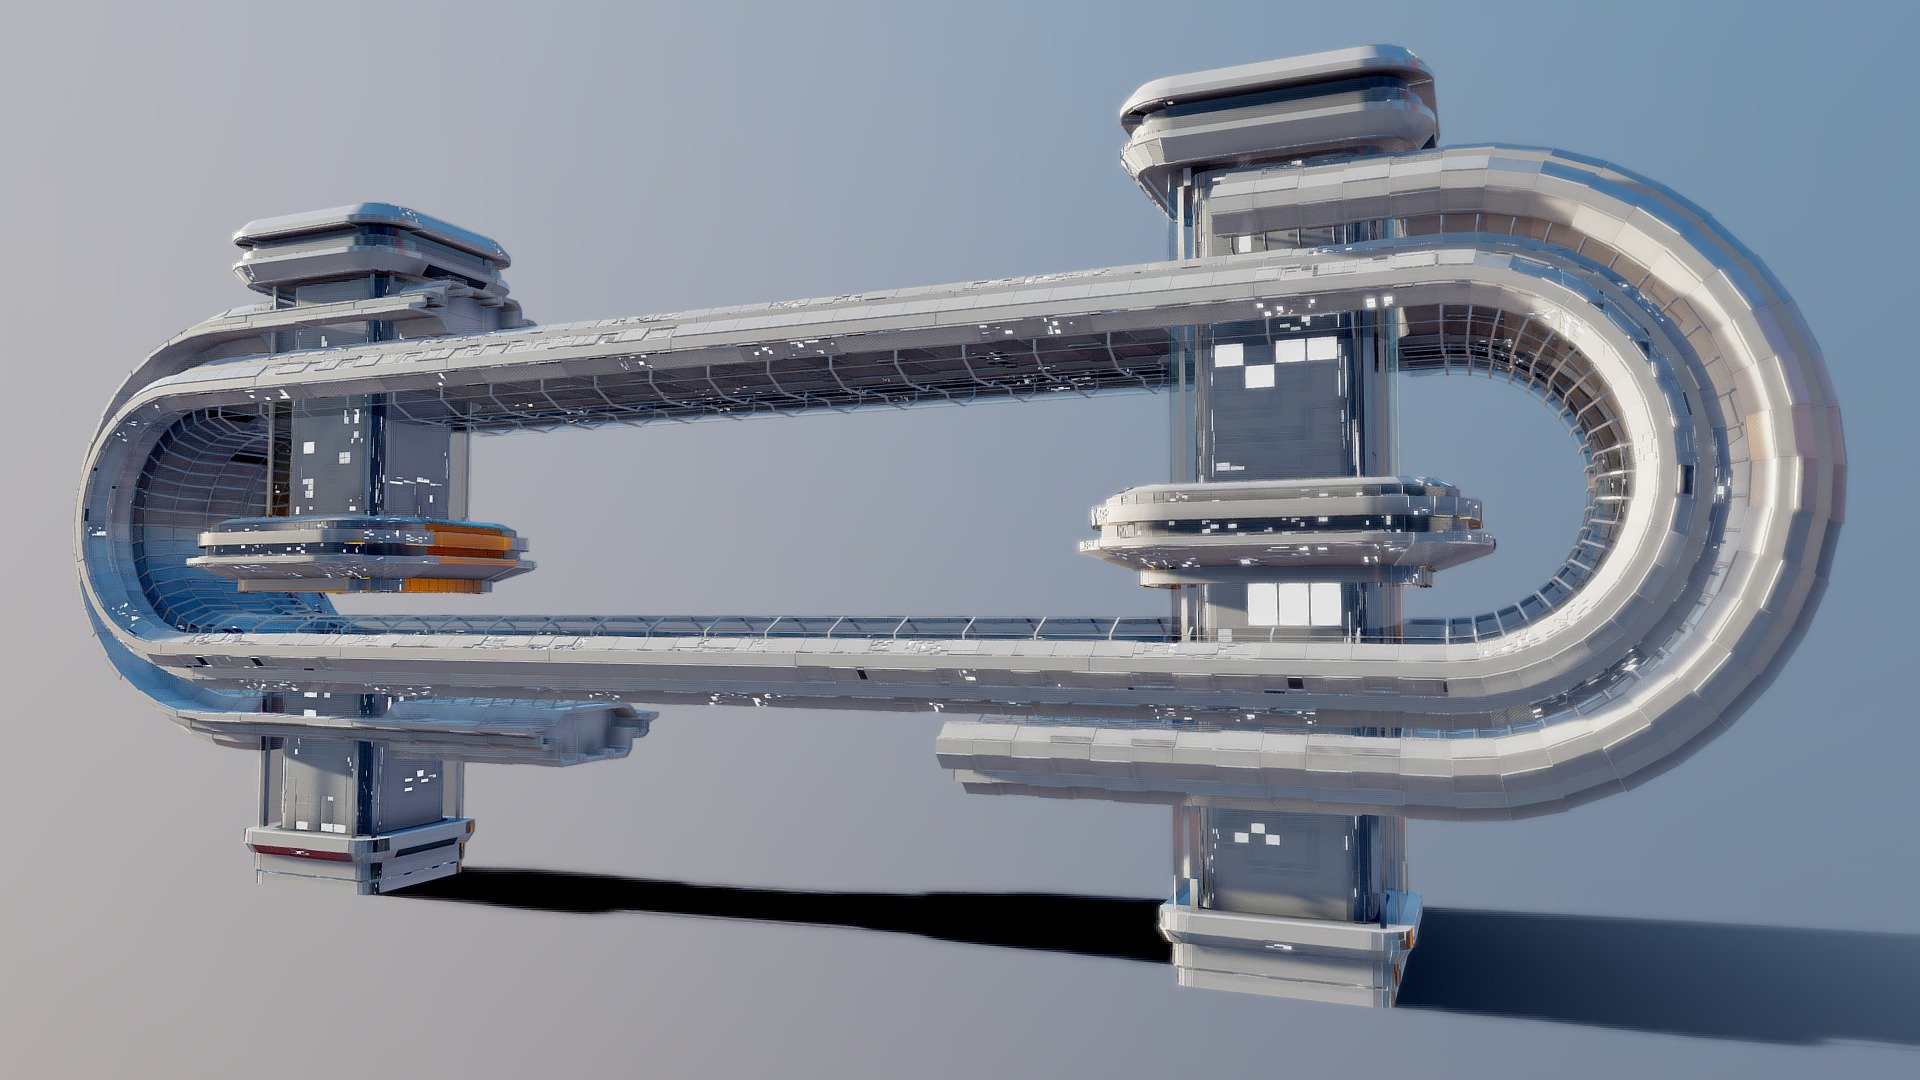 Sci-Fi Star base.
Generated proceduraly. 
FBX.
Very detailed 3d model